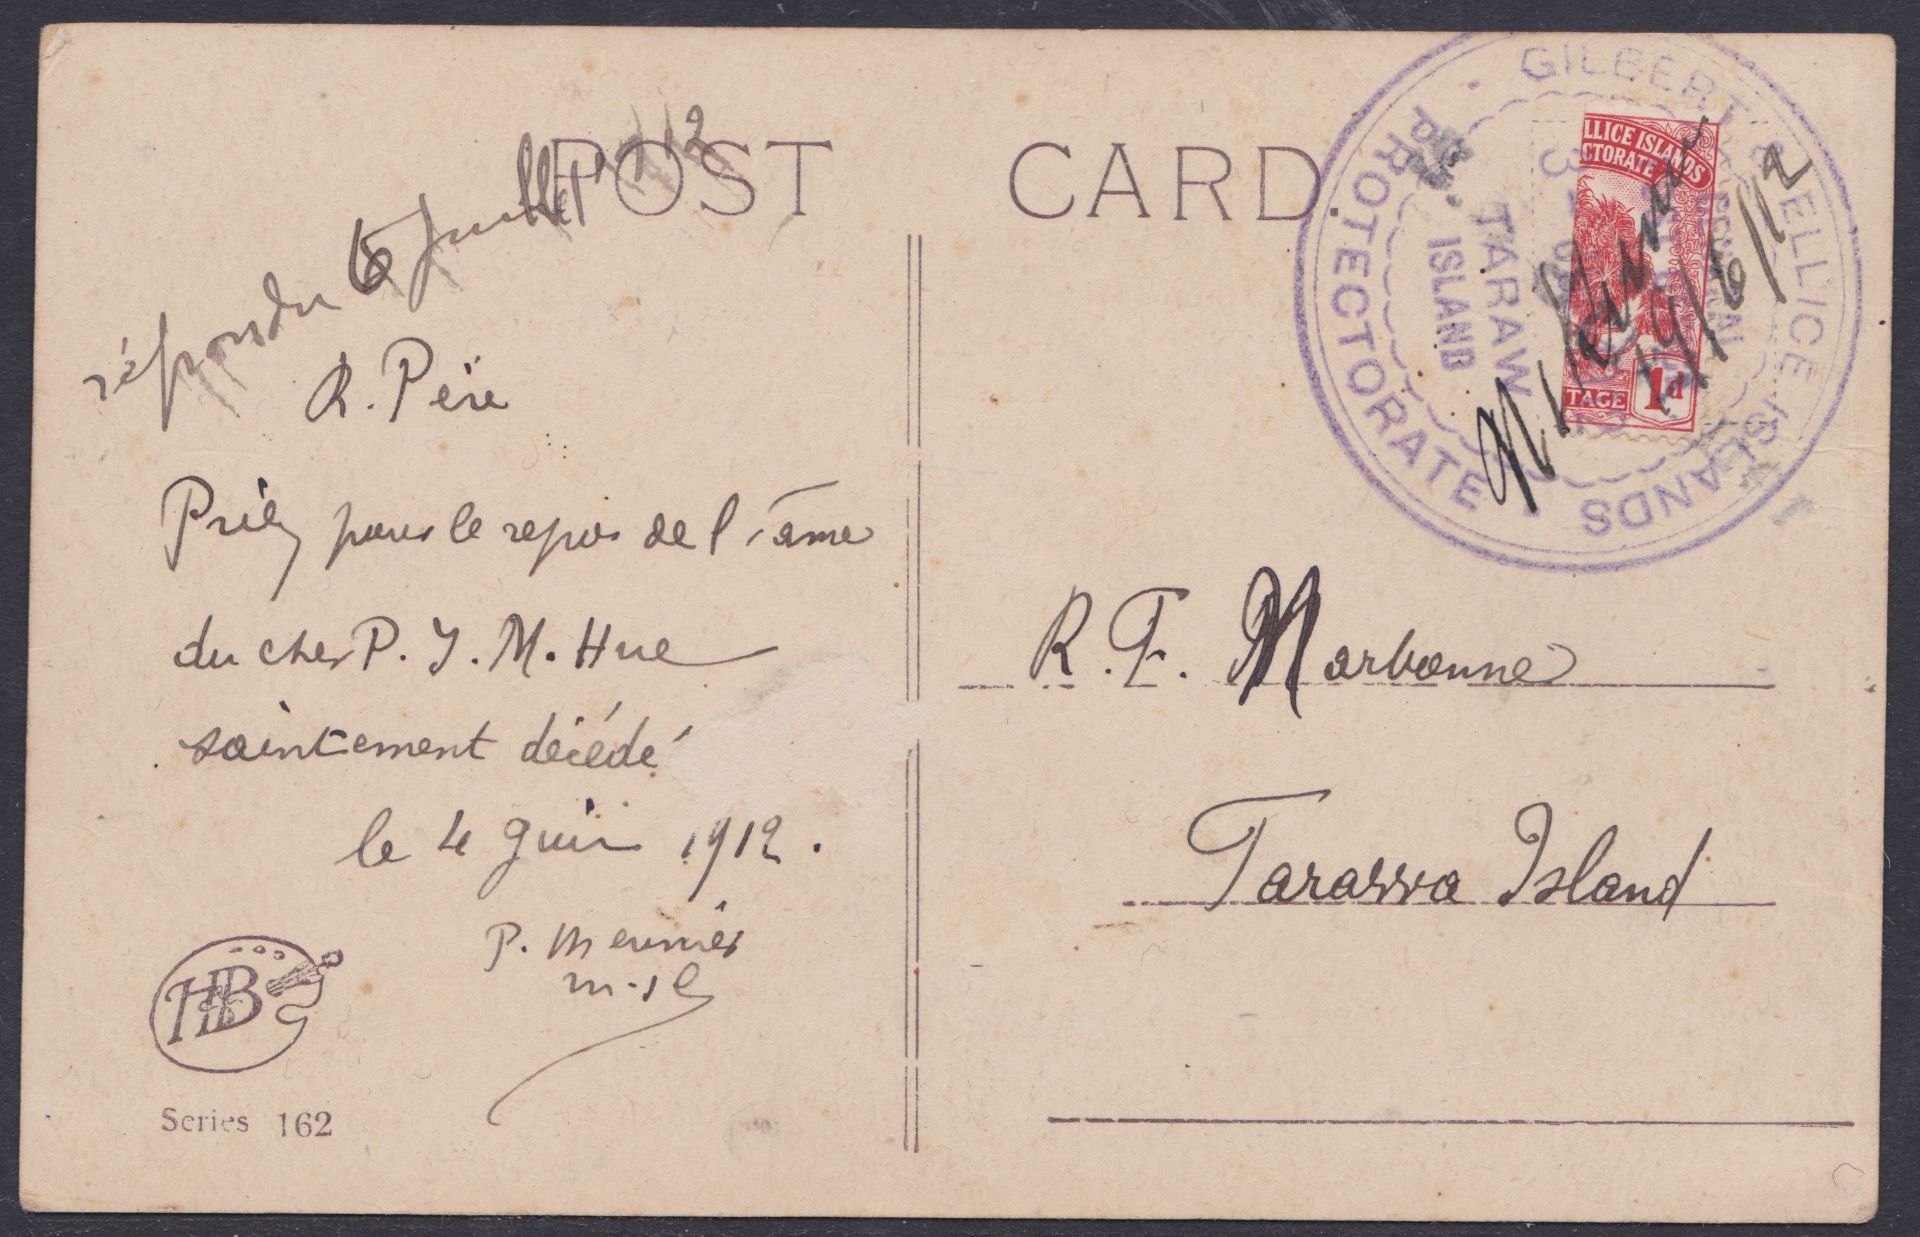 GILBERT & ELLICE ISLANDS 1912 (june 19) - Picture postcard to a catholic priest at Tarawa, the